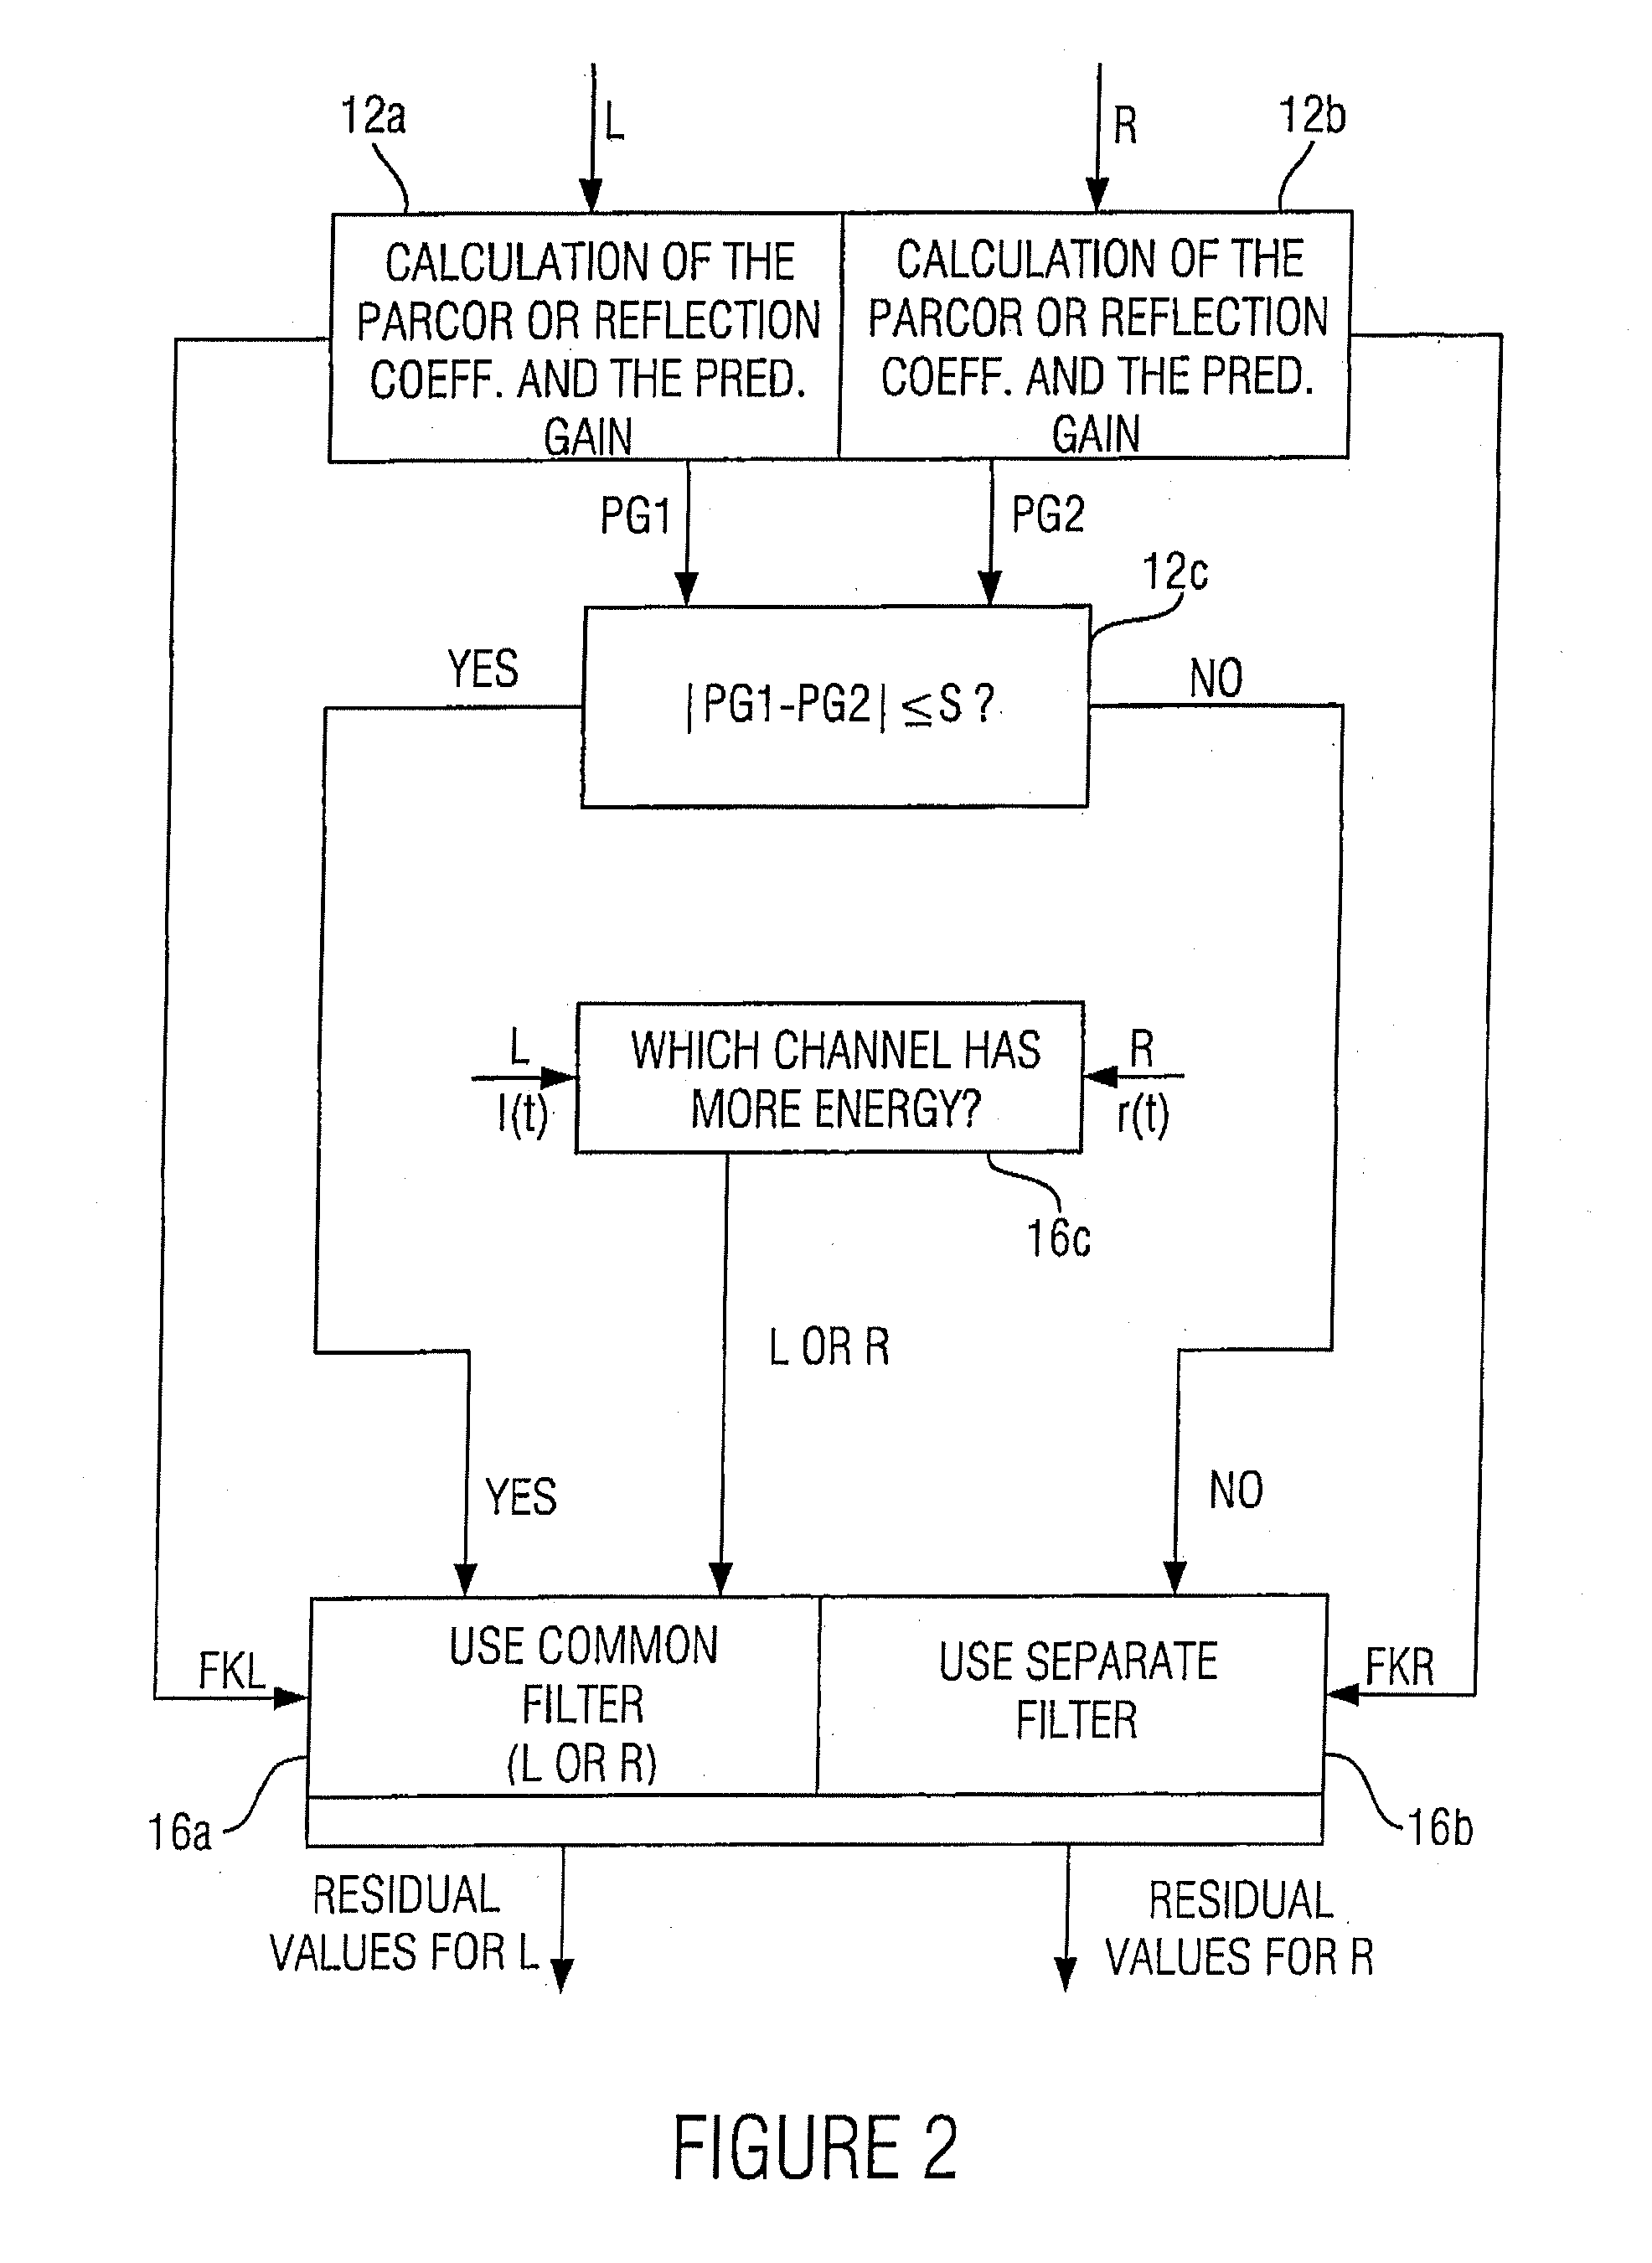 Apparatus and method for processing a multi-channel signal